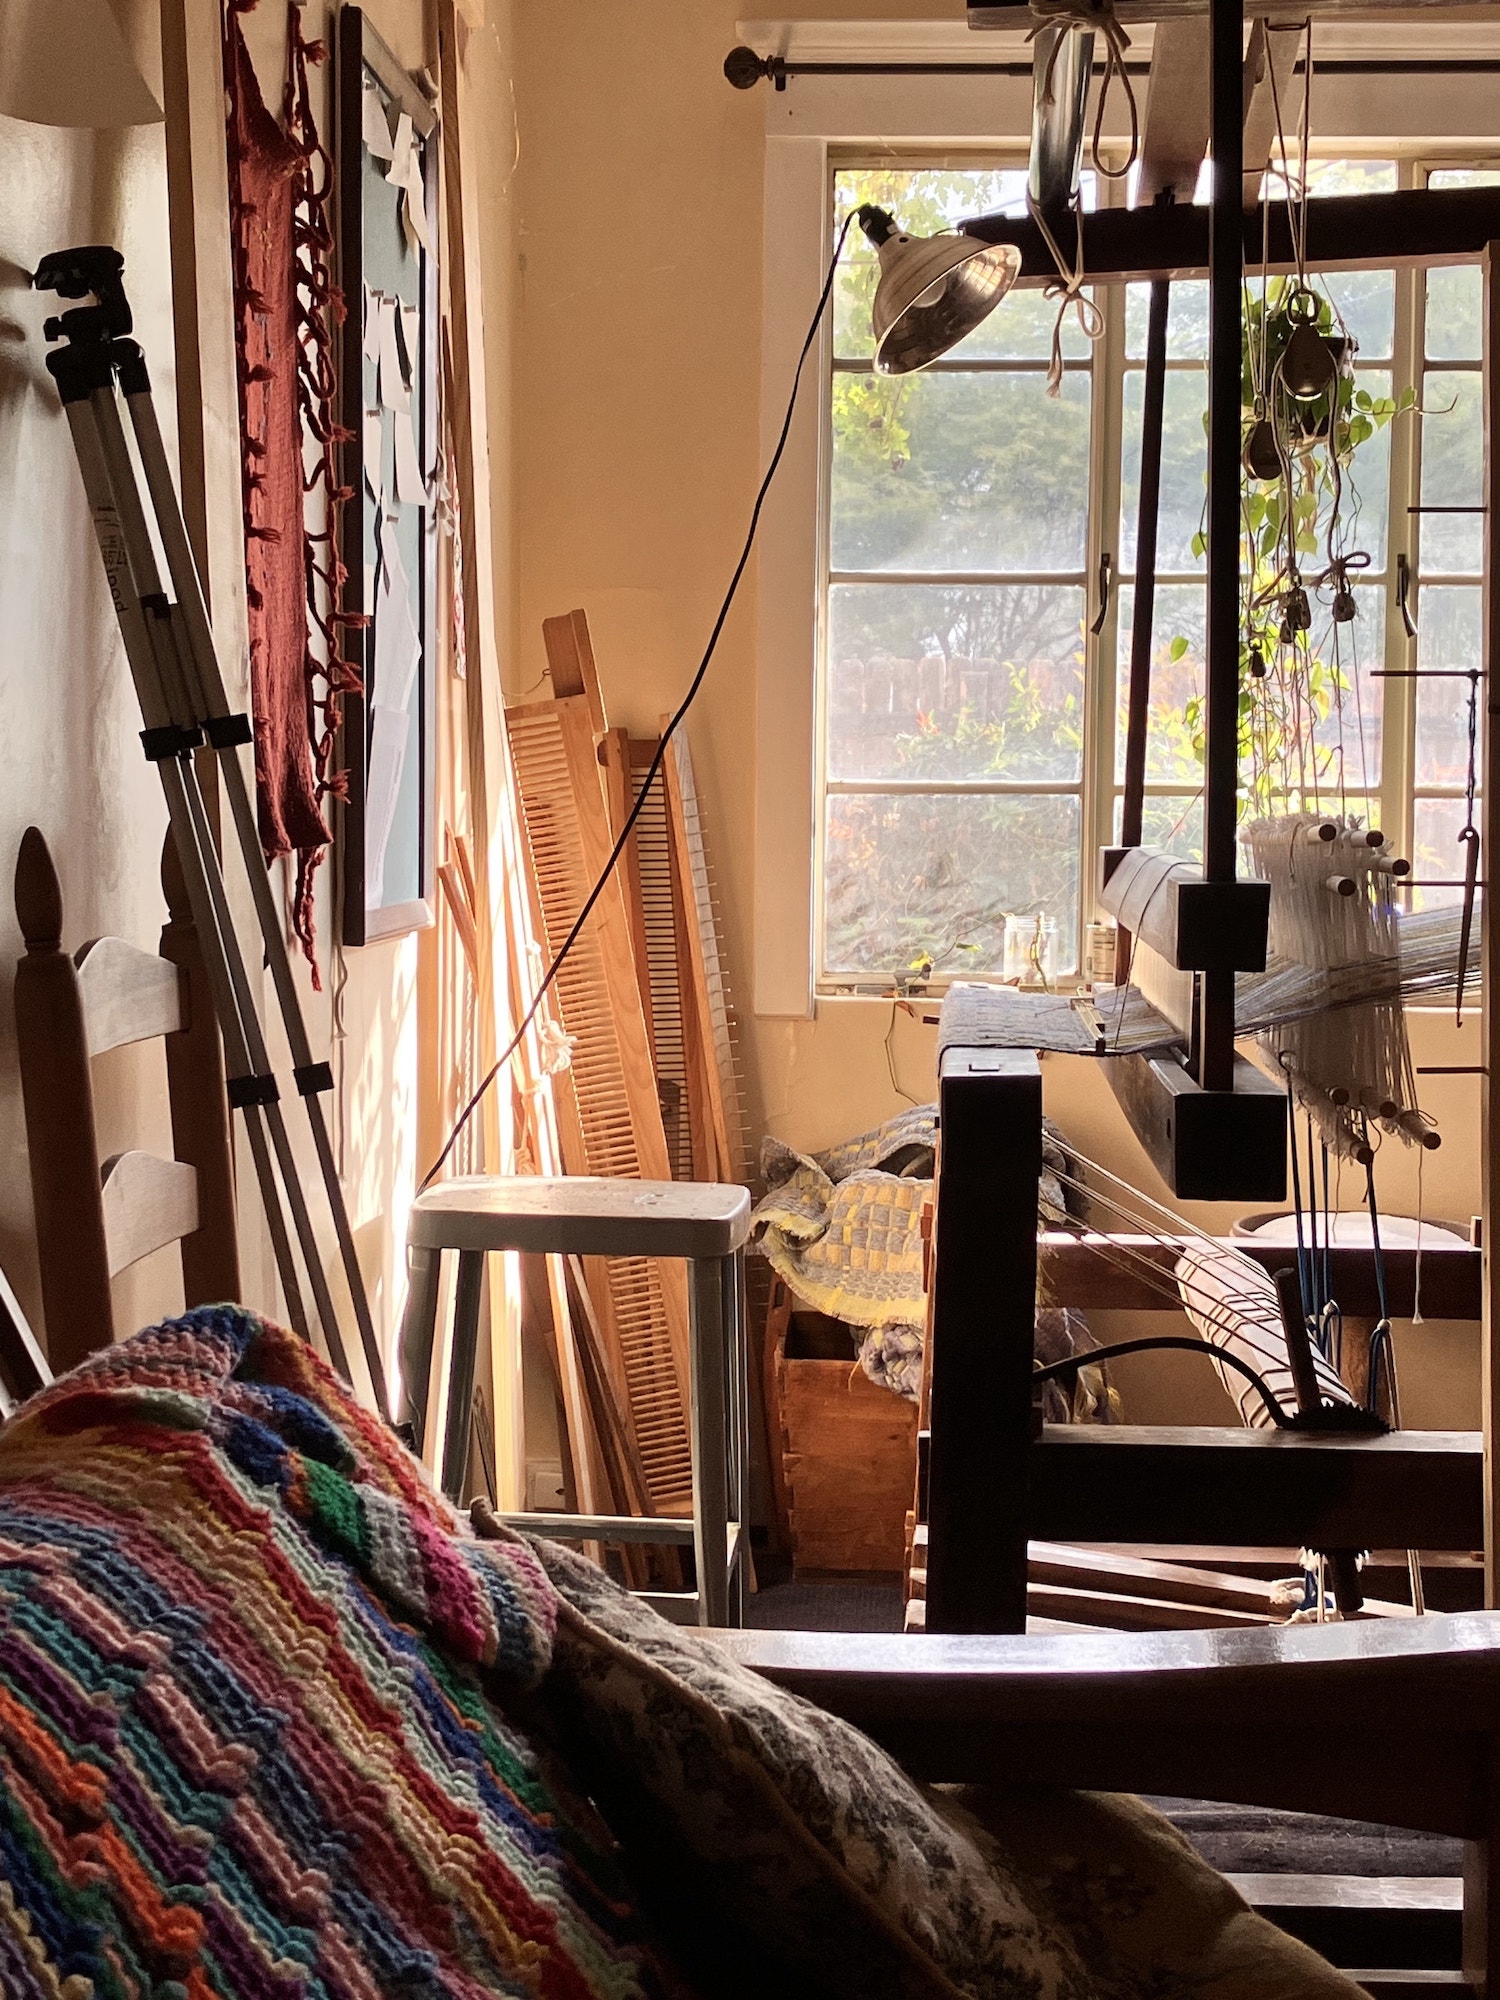 the loom corner of my studio in the bright morning light. bright textiles and wooden sticks everywhere.